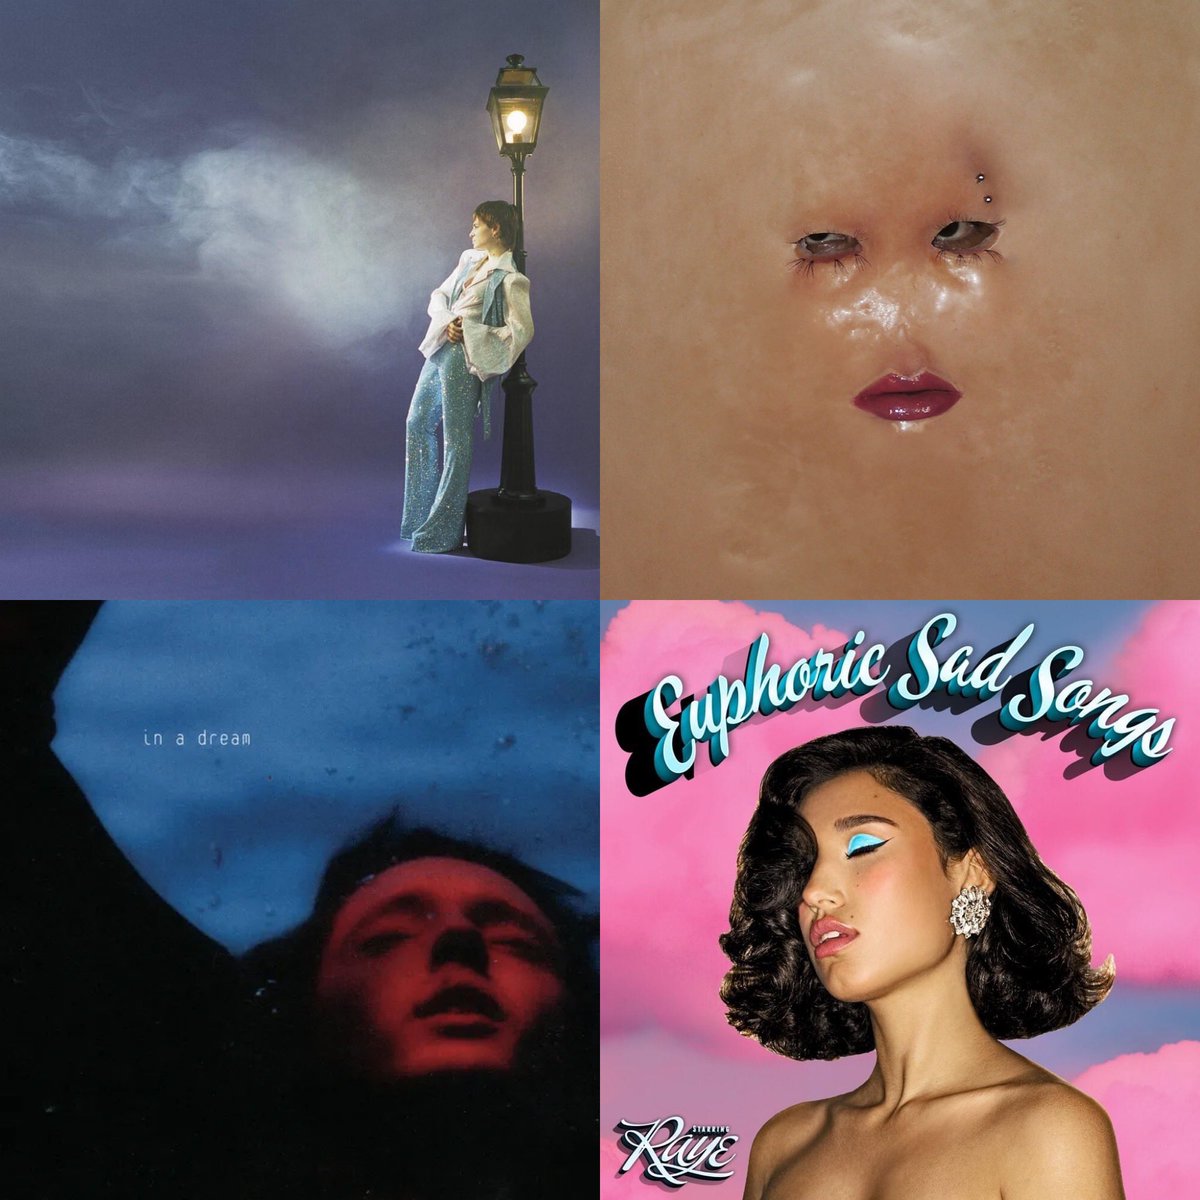 First of all, a mini ranking of the best EP’s1. La vita nuova / Christine and the Queens2. Alias / Shygirl3. in a dream / Troye Sivan4. Euphoric Sad Songs / RAYE